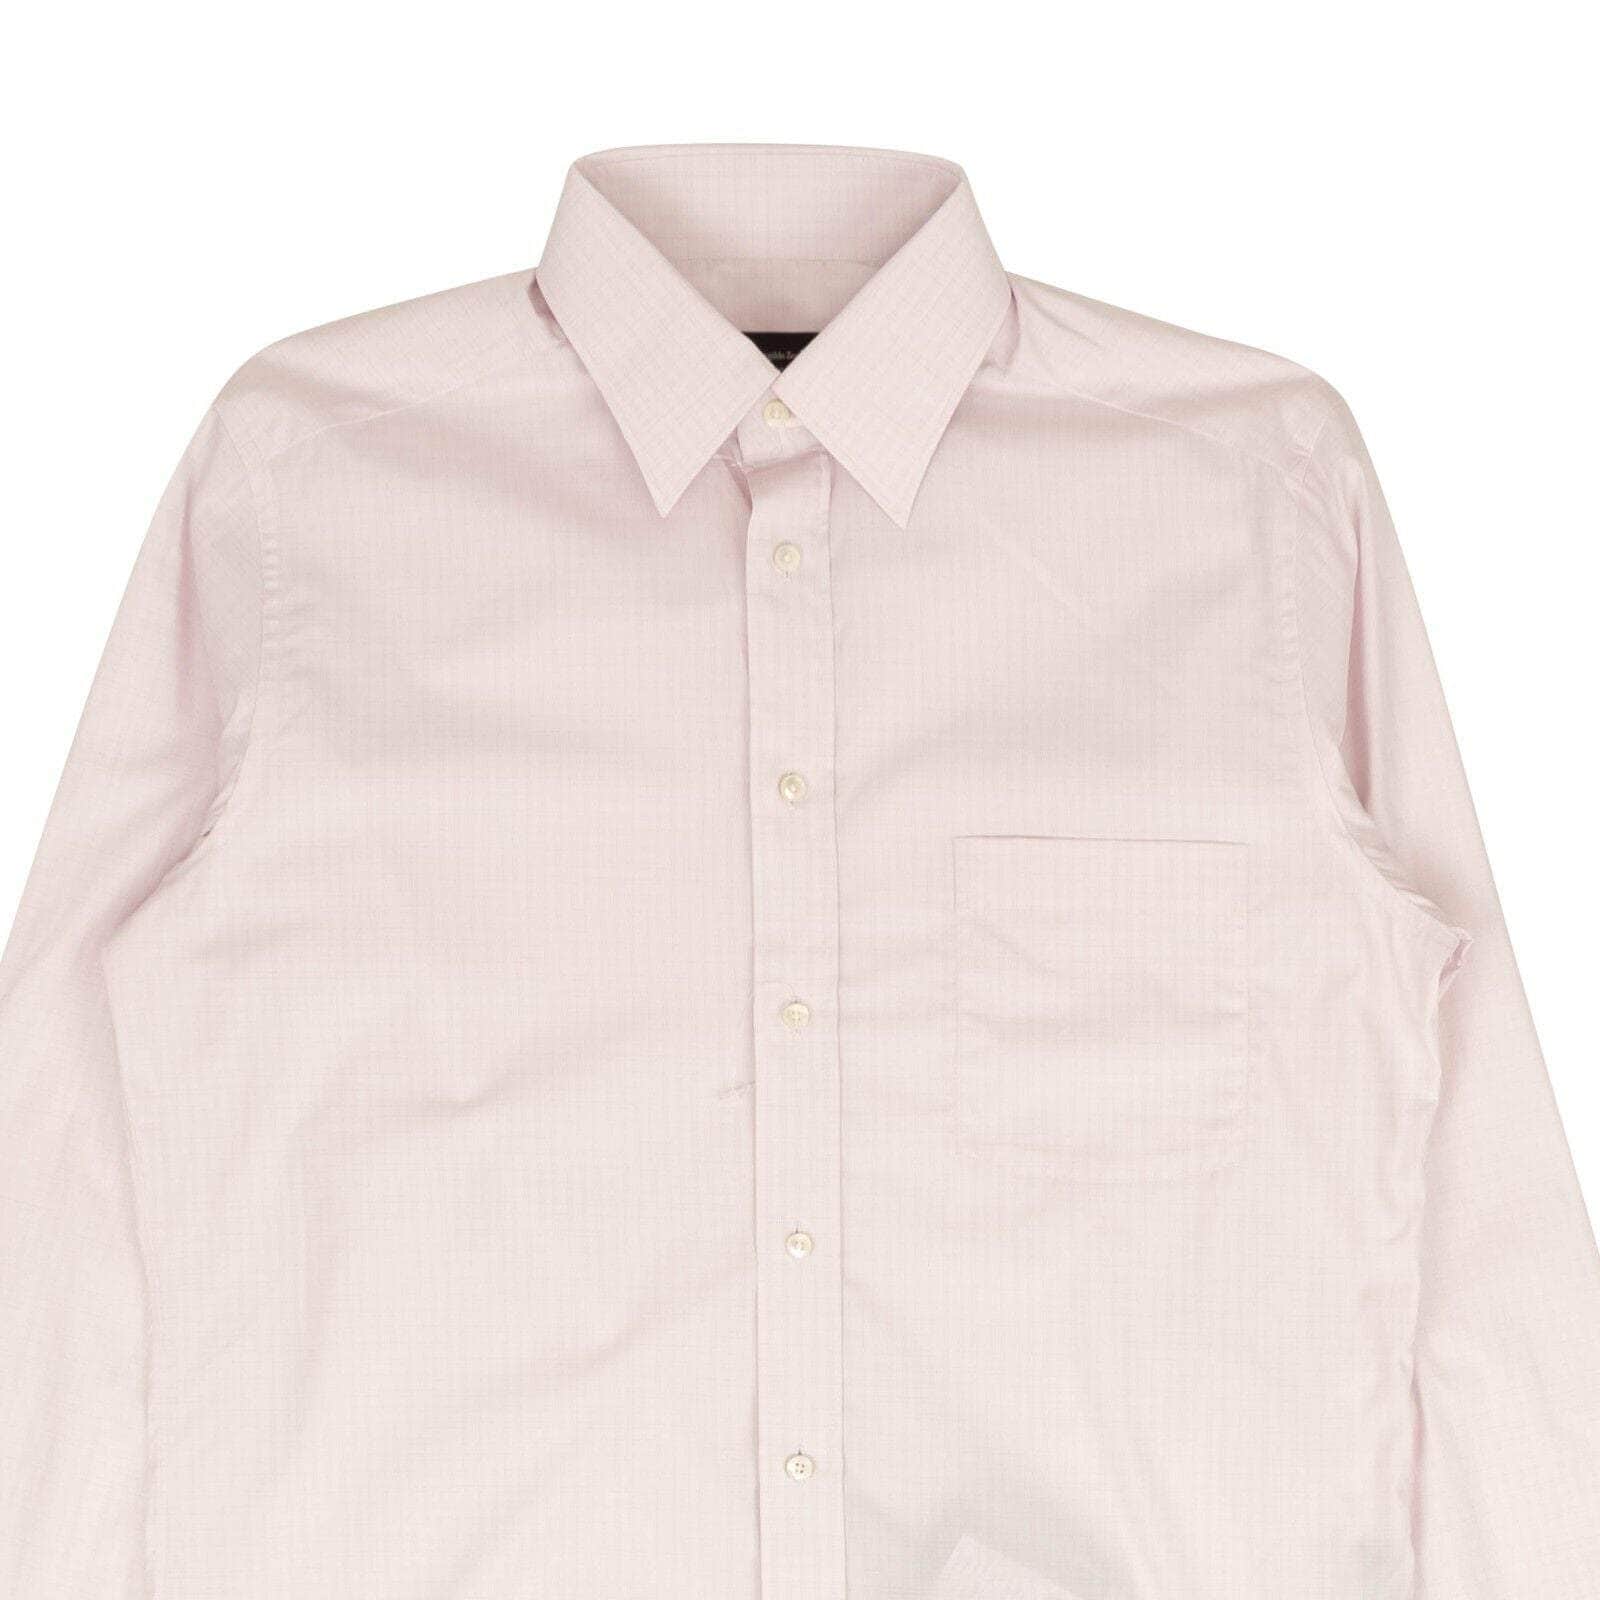 Ermenegildo Zegna 250-500, channelenable-all, chicmi, couponcollection, gender-mens, main-clothing, mens-shoes, size-41 41 Pink Plaid Dress Shirt 95-ZGN-1009/41 95-ZGN-1009/41